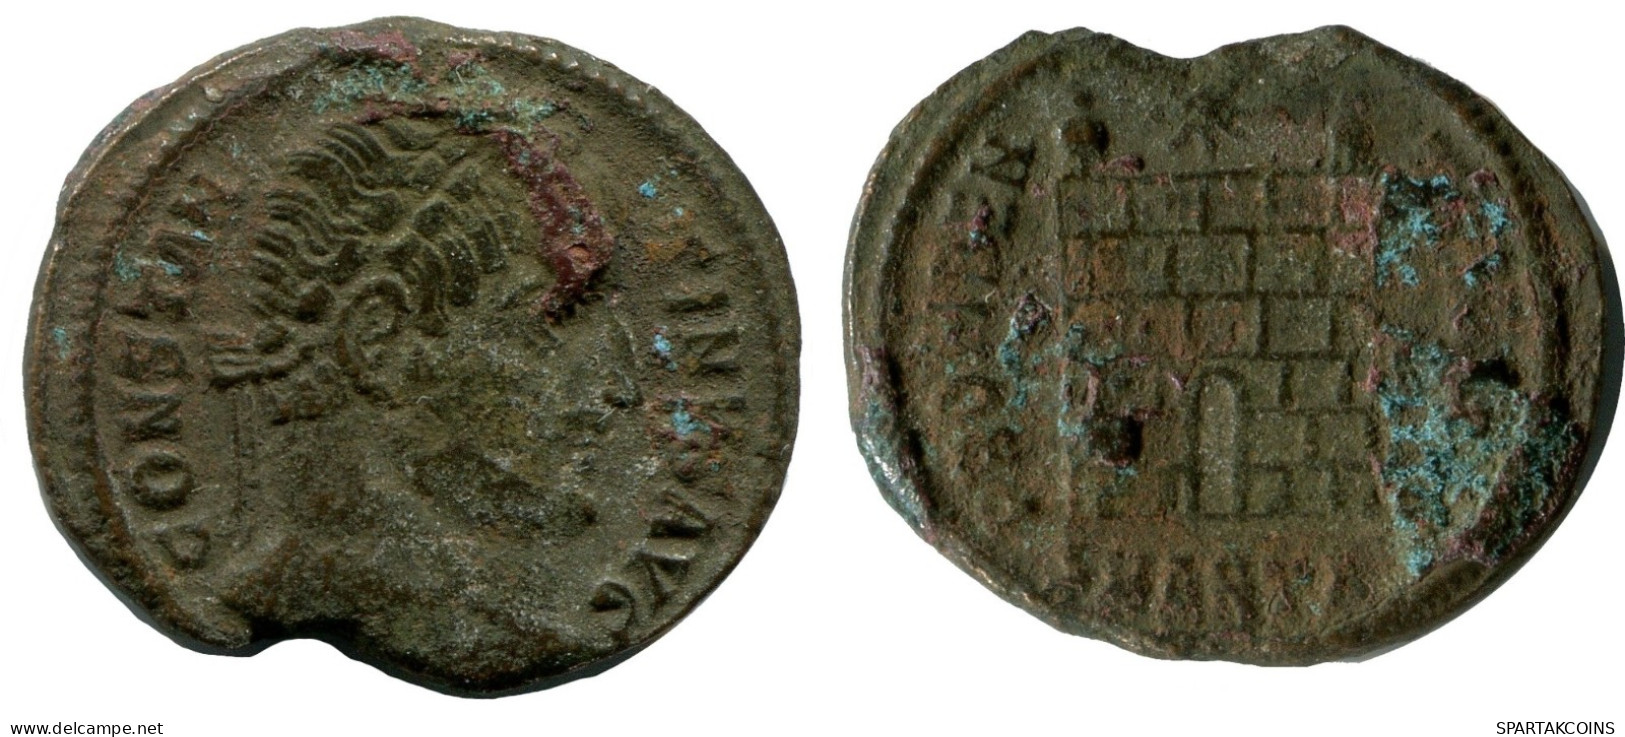 CONSTANTINE I MINTED IN ANTIOCH FOUND IN IHNASYAH HOARD EGYPT #ANC10613.14.D.A - The Christian Empire (307 AD To 363 AD)